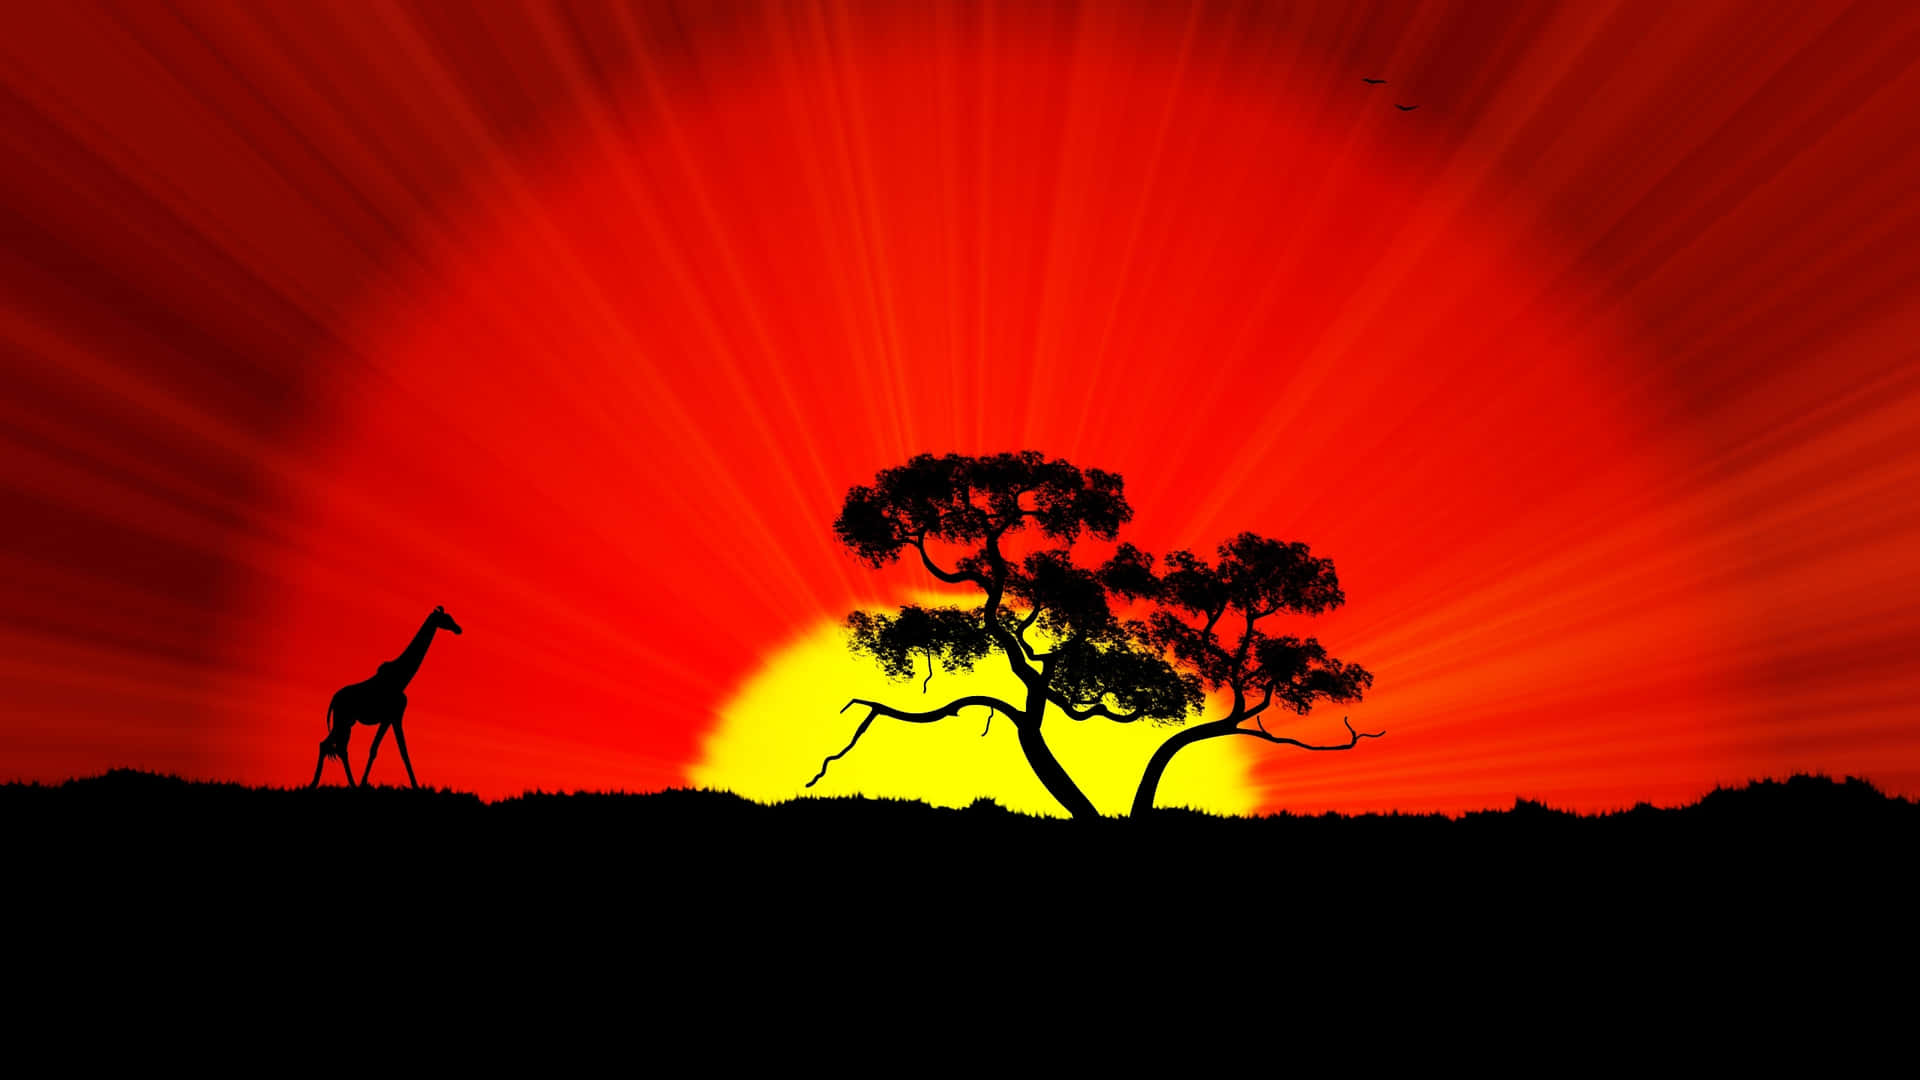 "Witness the glory of nature with this stunning African landscape" Wallpaper